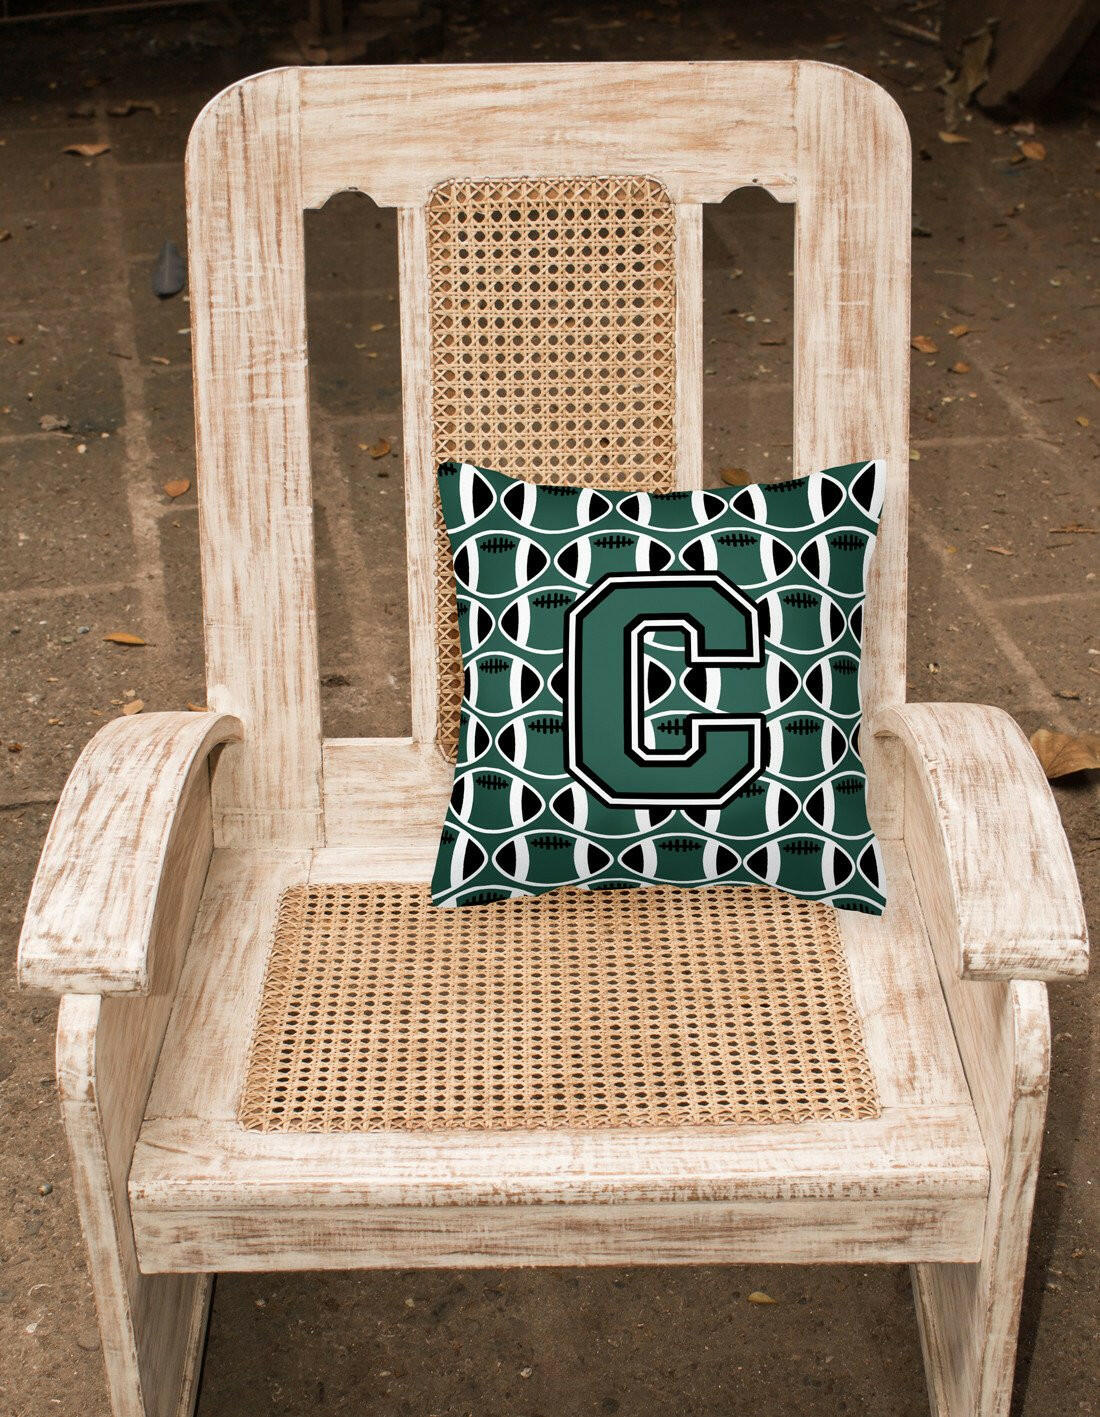 Letter C Football Green and White Fabric Decorative Pillow CJ1071-CPW1414 by Caroline's Treasures